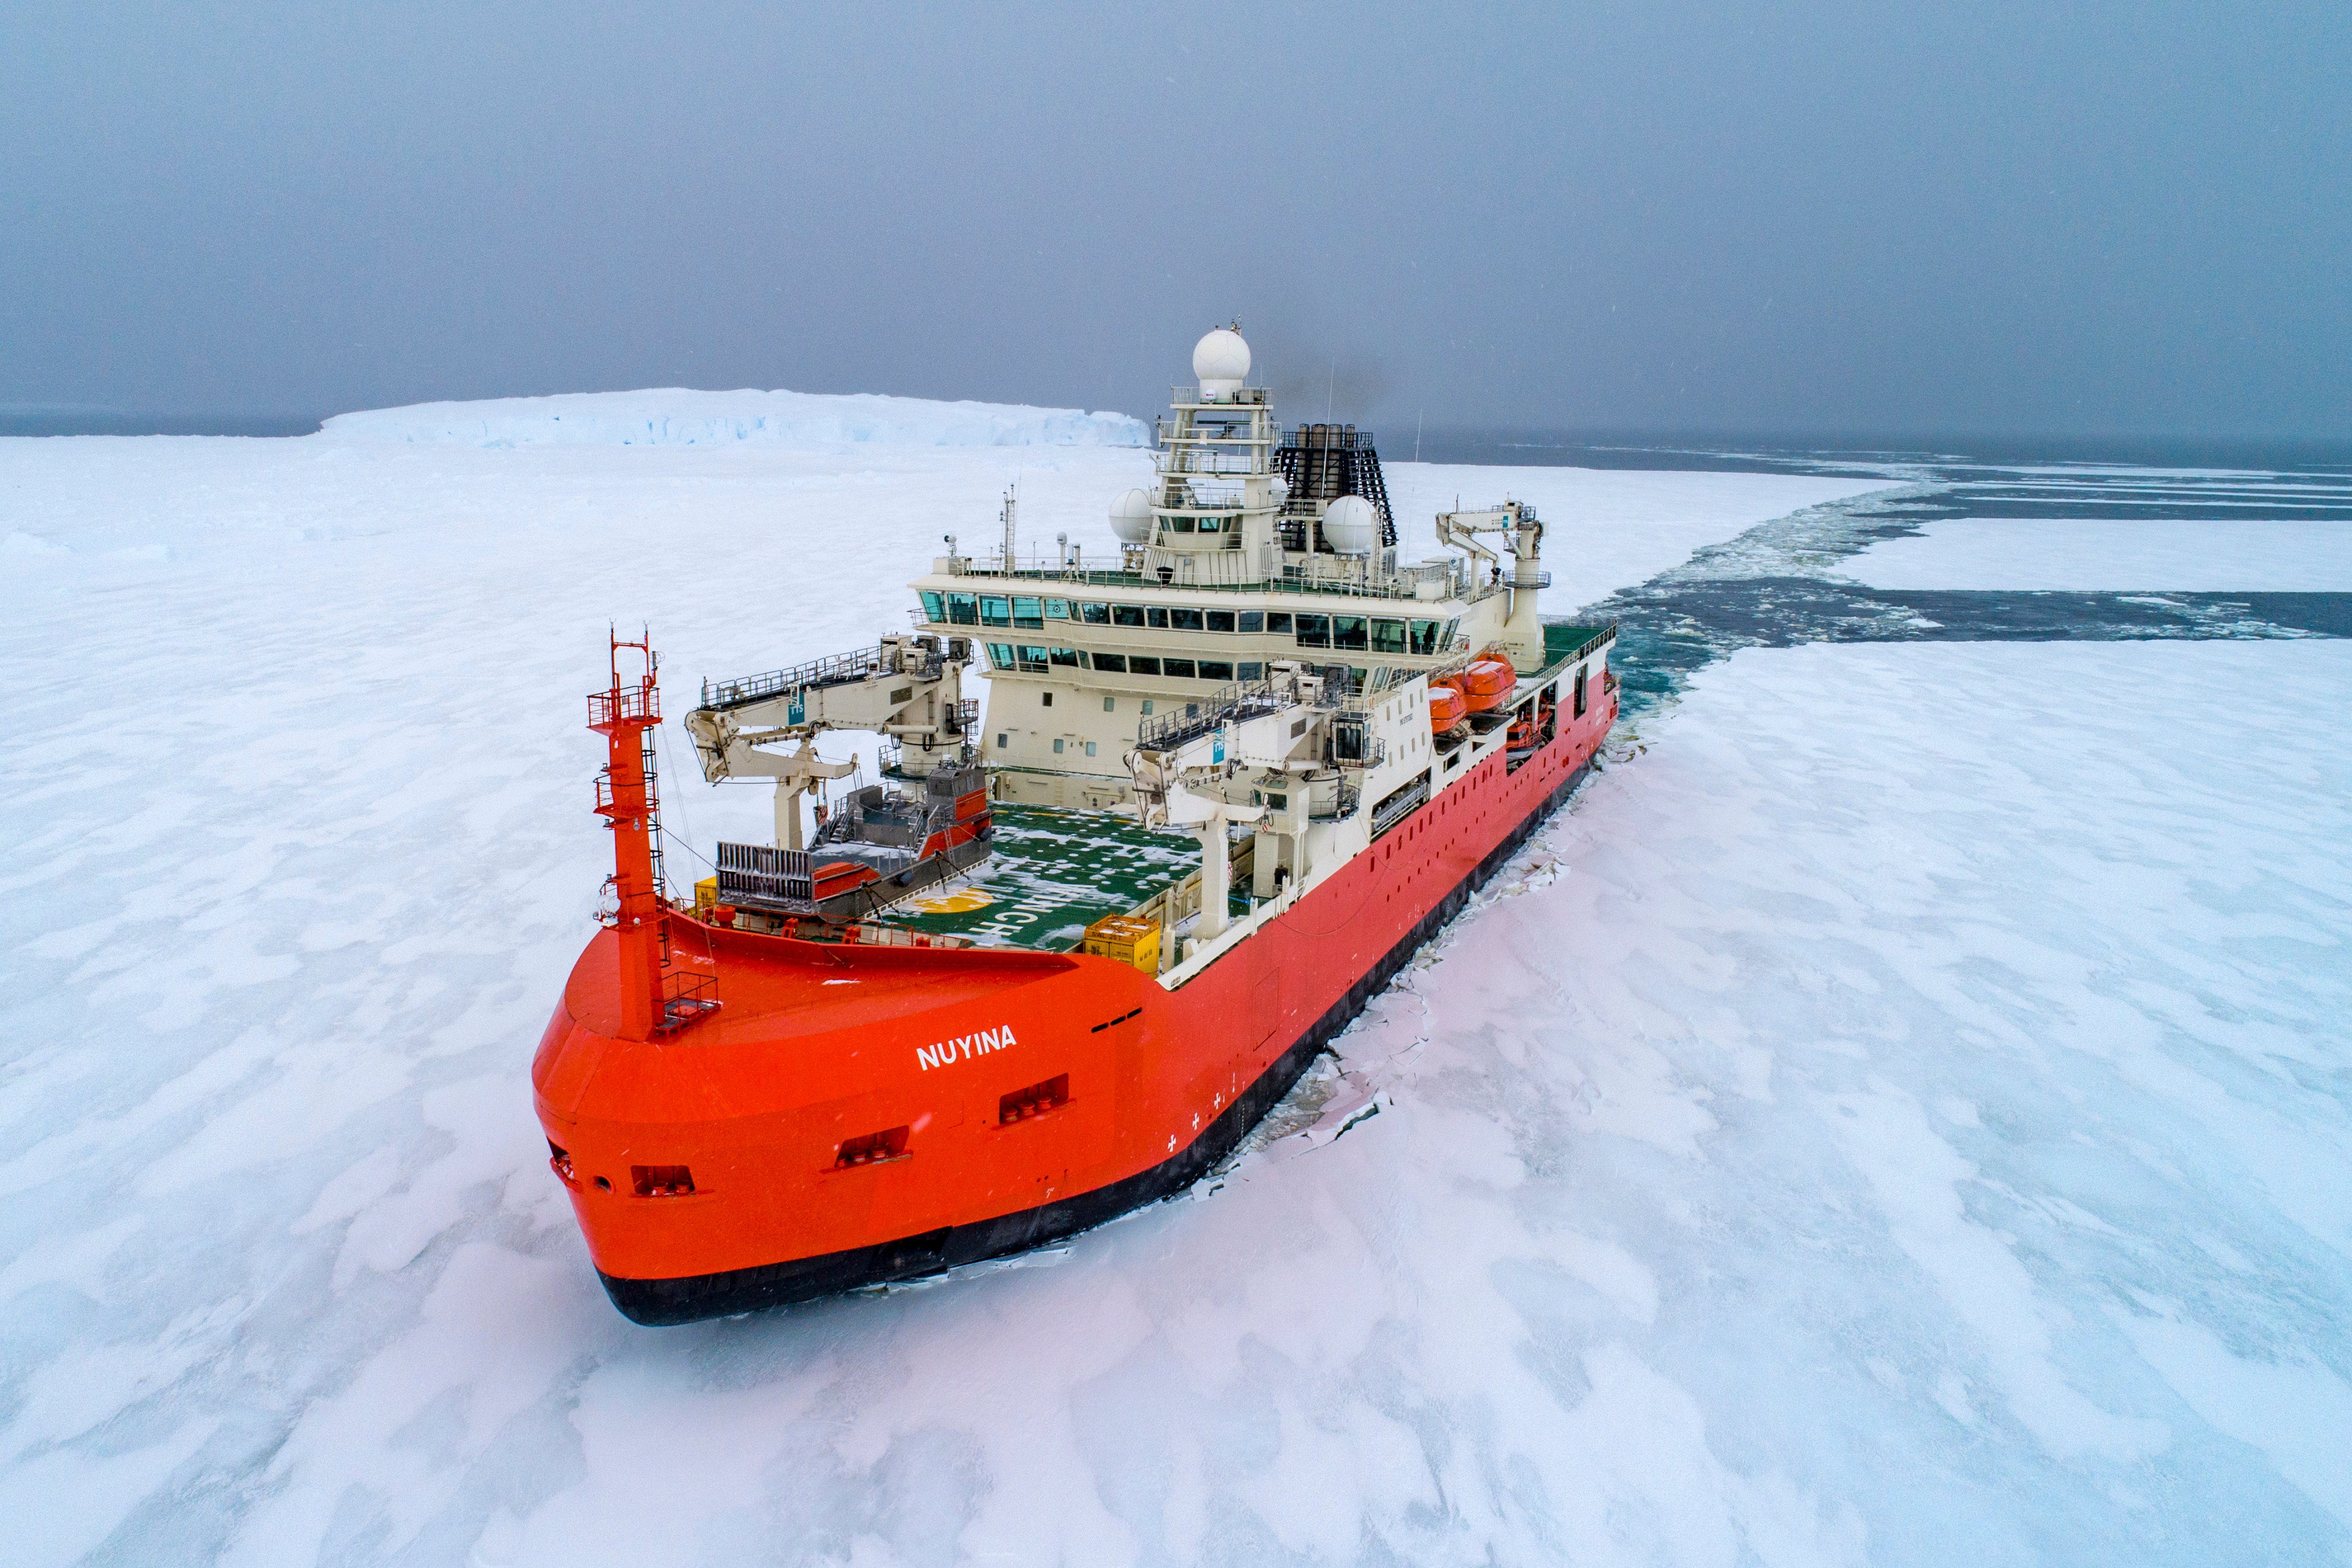 Australian icebreaker RSV Nuyina sails through the Antarctic. The ship broke through sea ice to reach a location 144km from the Casey research base before deploying helicopters to collect the patient. Photo: Australian Antarctic Division via AP